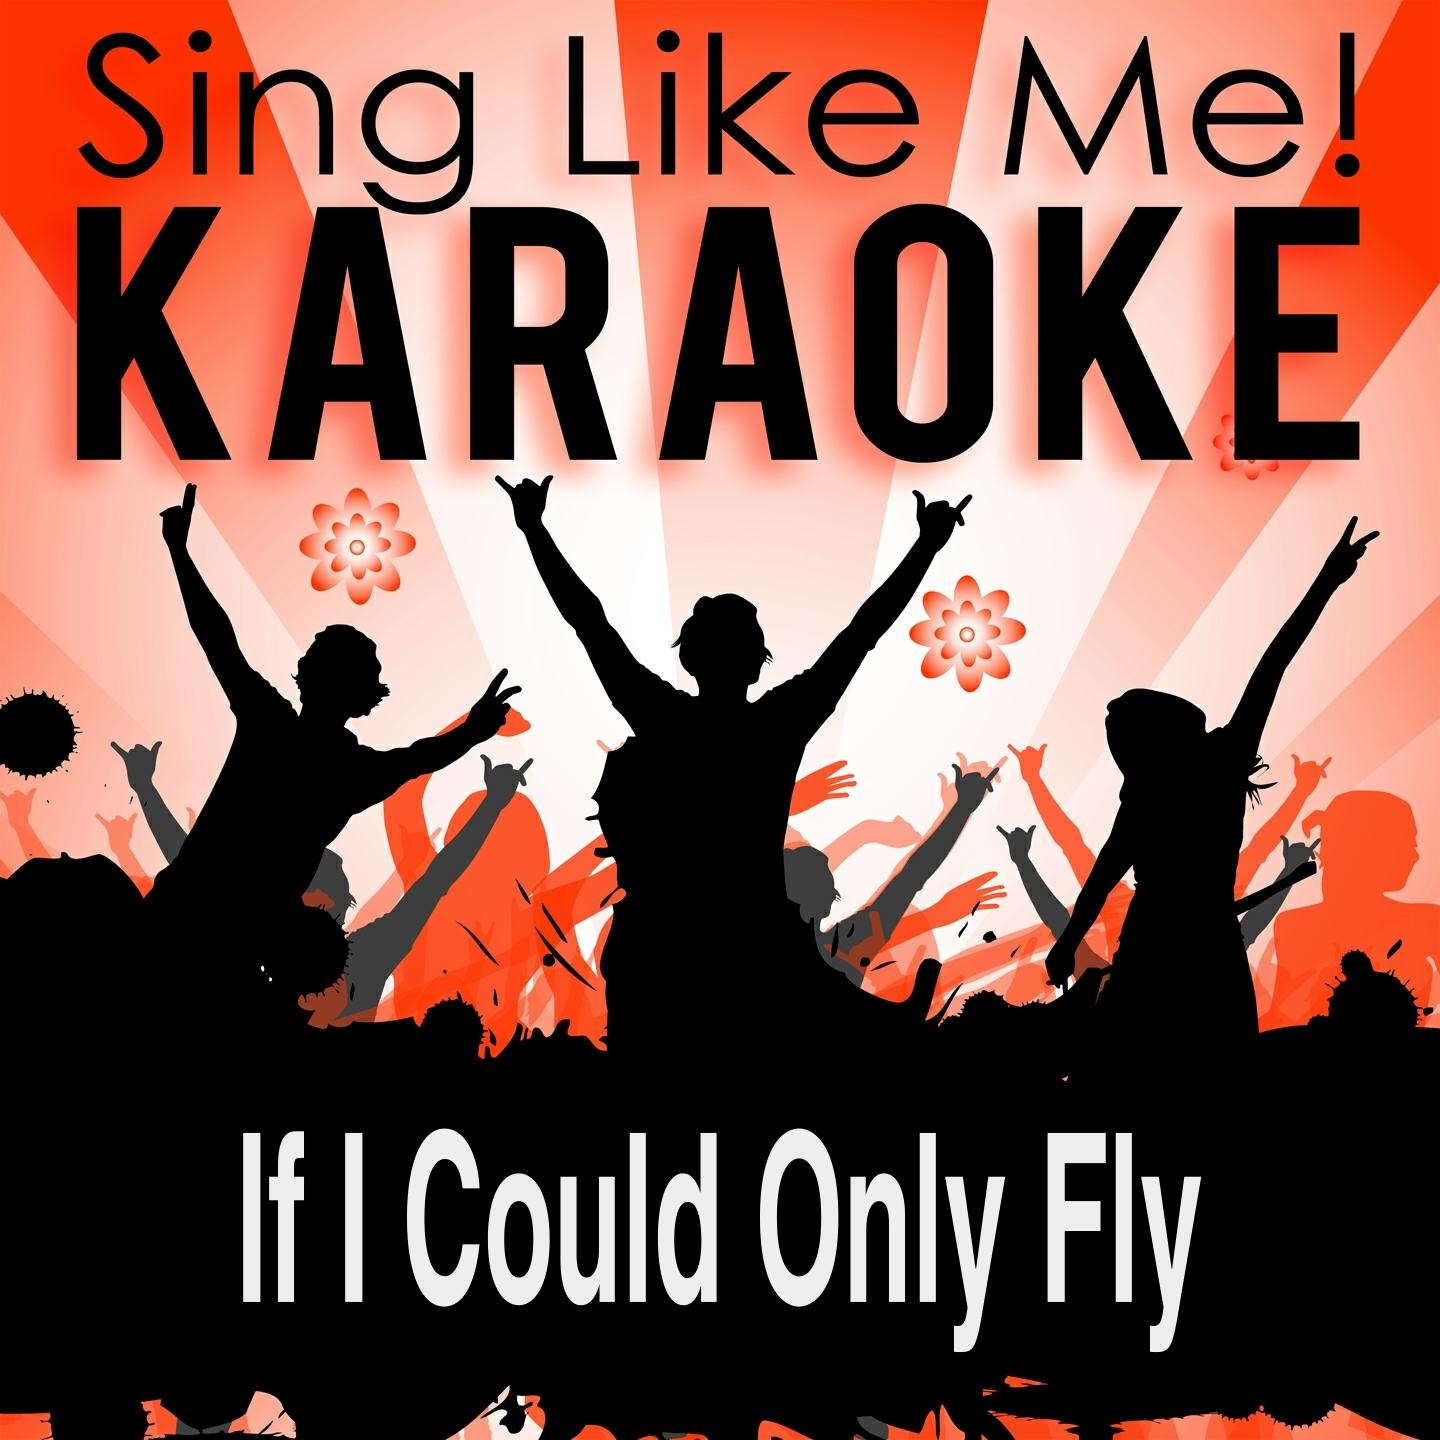 If I Could Only Fly (Karaoke Version) (Originally Performed By Merle Haggard)